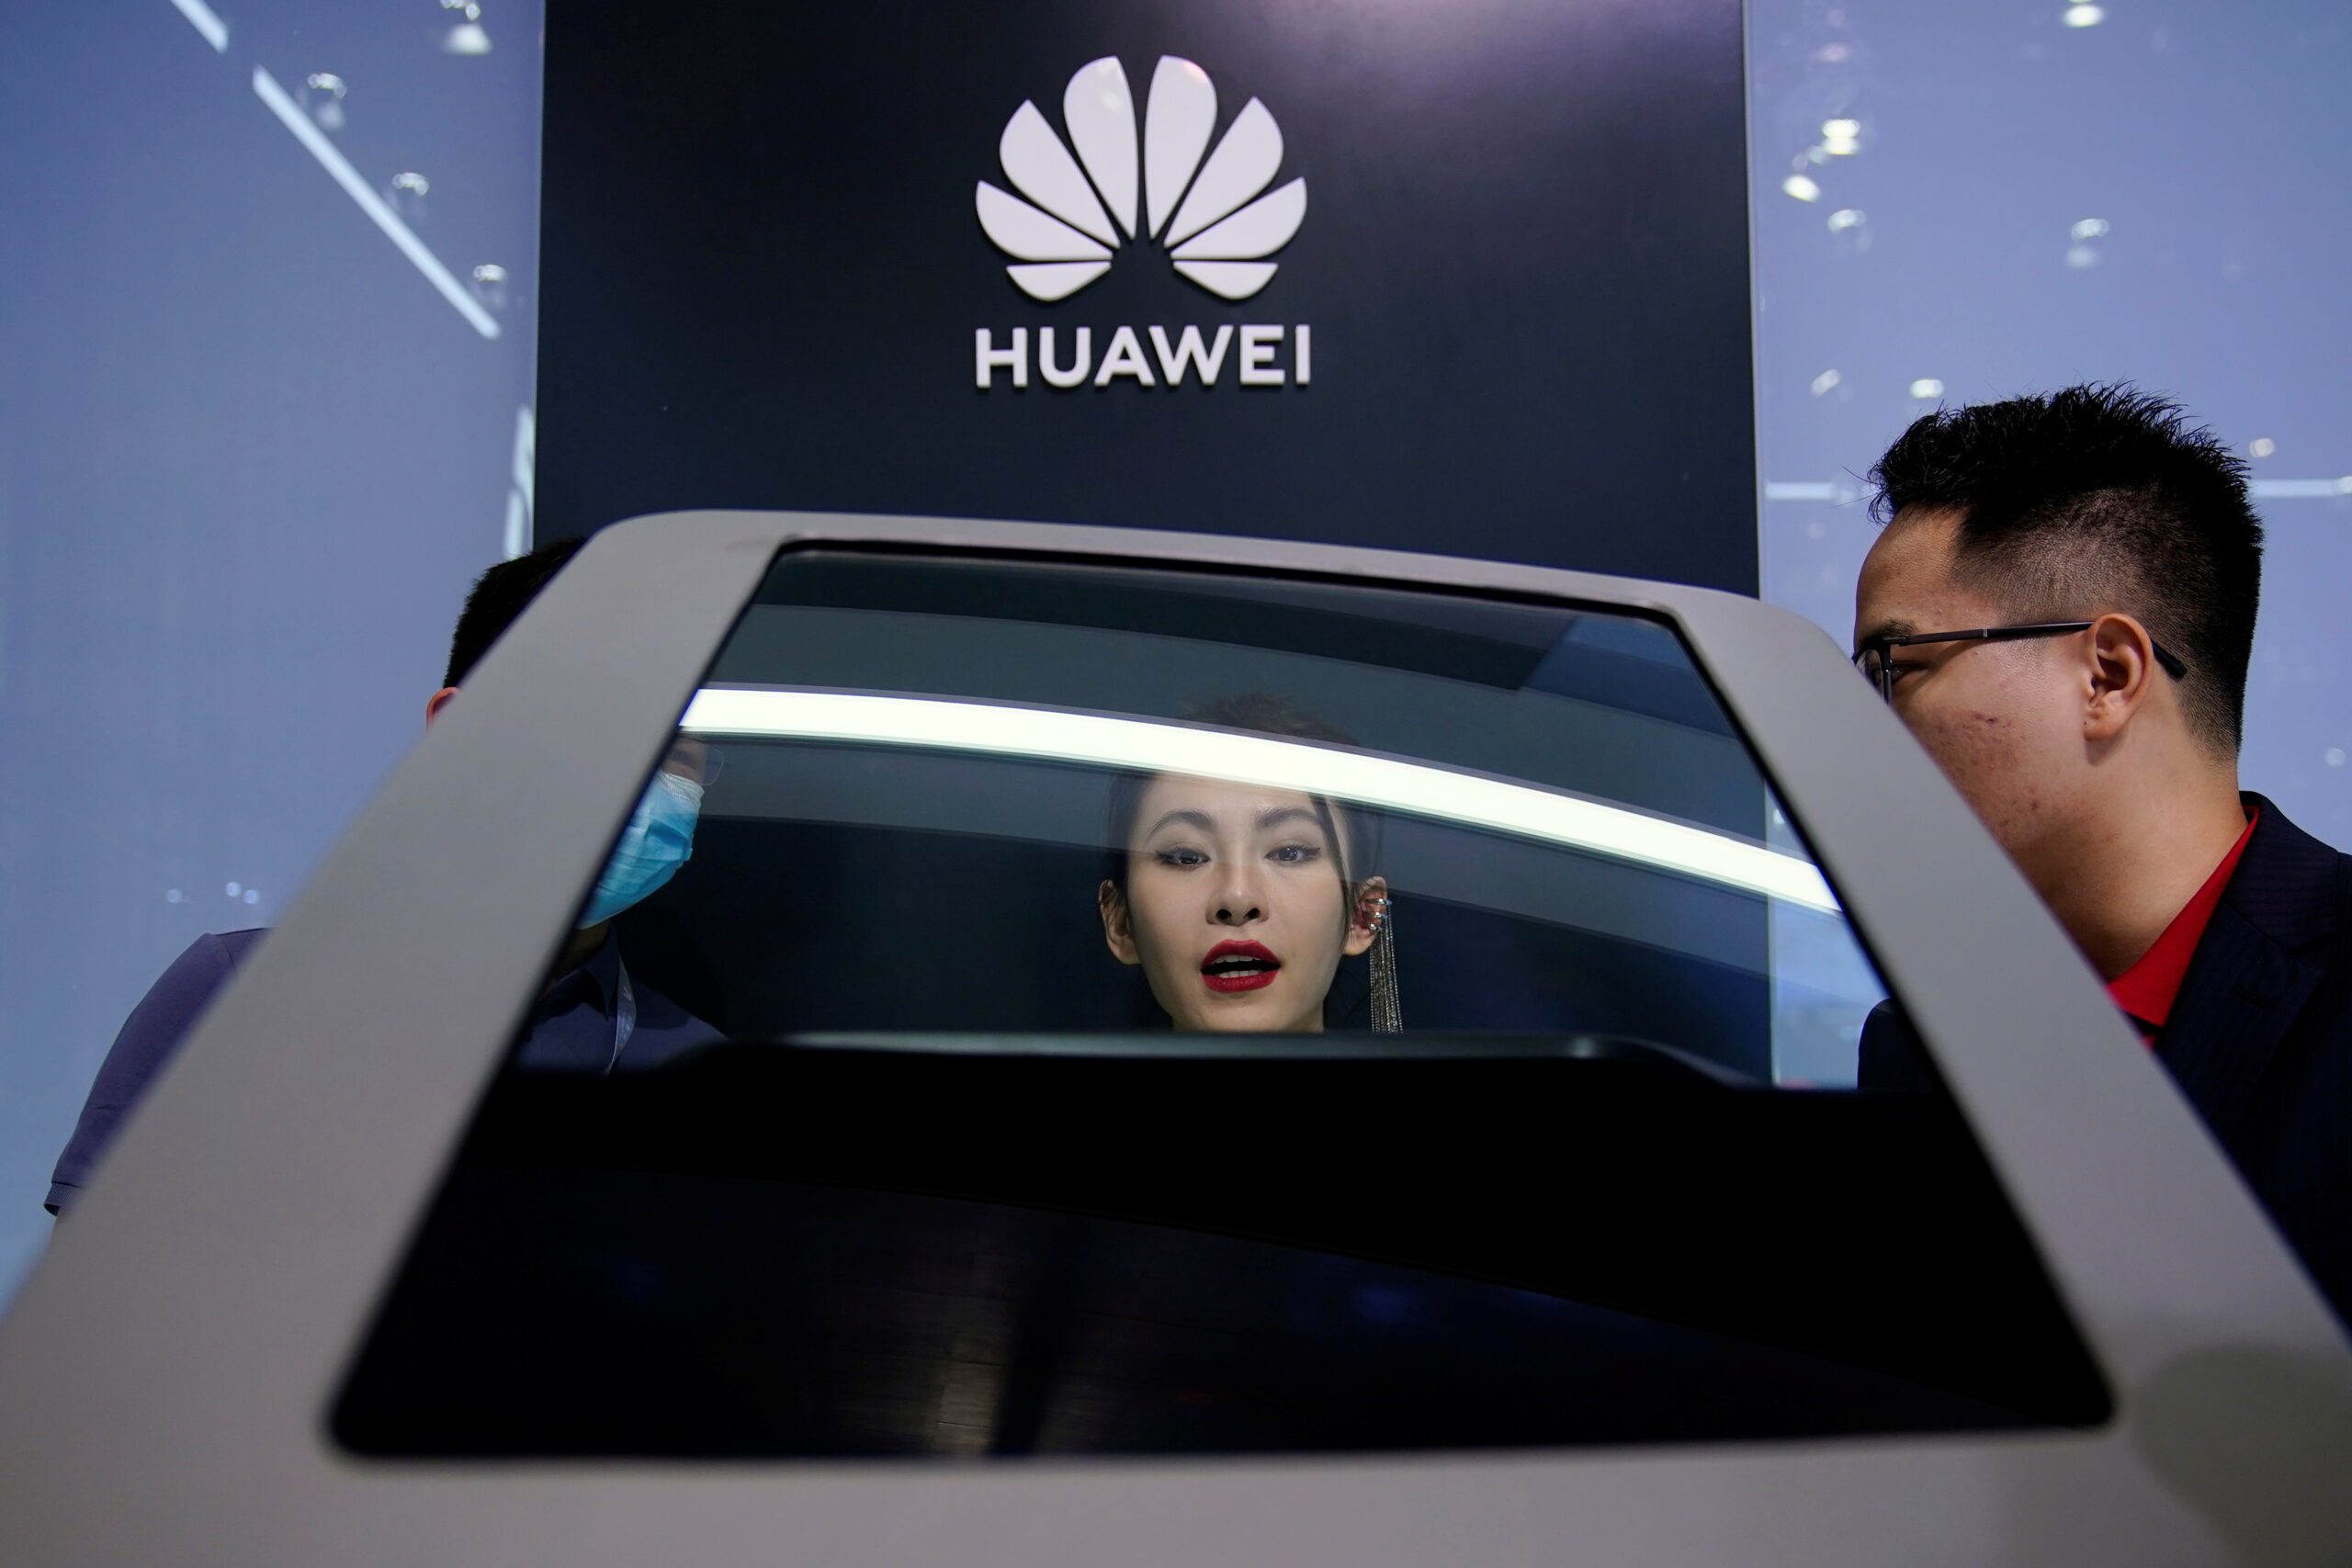 People check a display near a Huawei logo during a media day for the Auto Shanghai show in Shanghai, China April 19, 2021. REUTERS/Aly Song